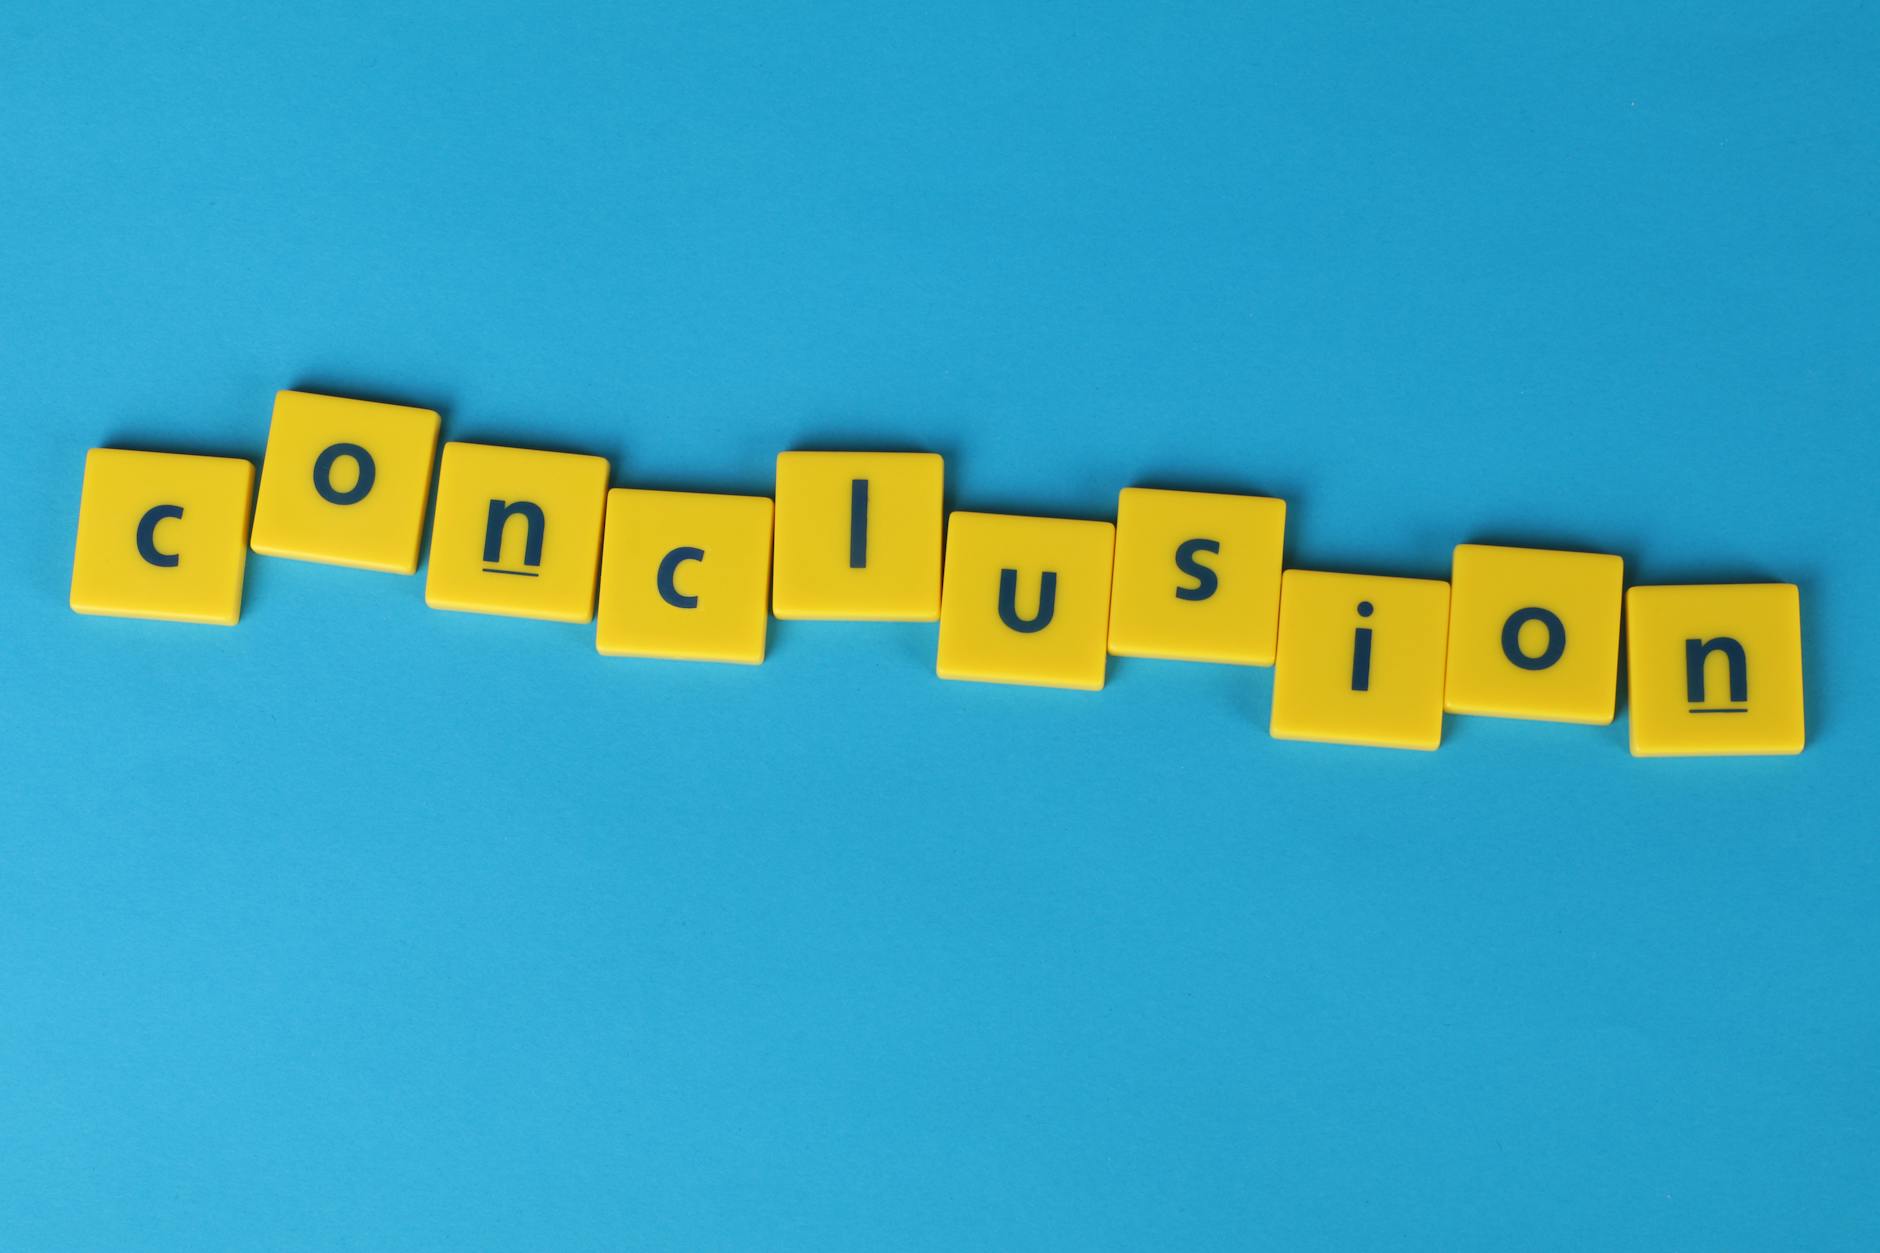 \"Conclusion\" Word Formed From Lettered Yellow Tiles